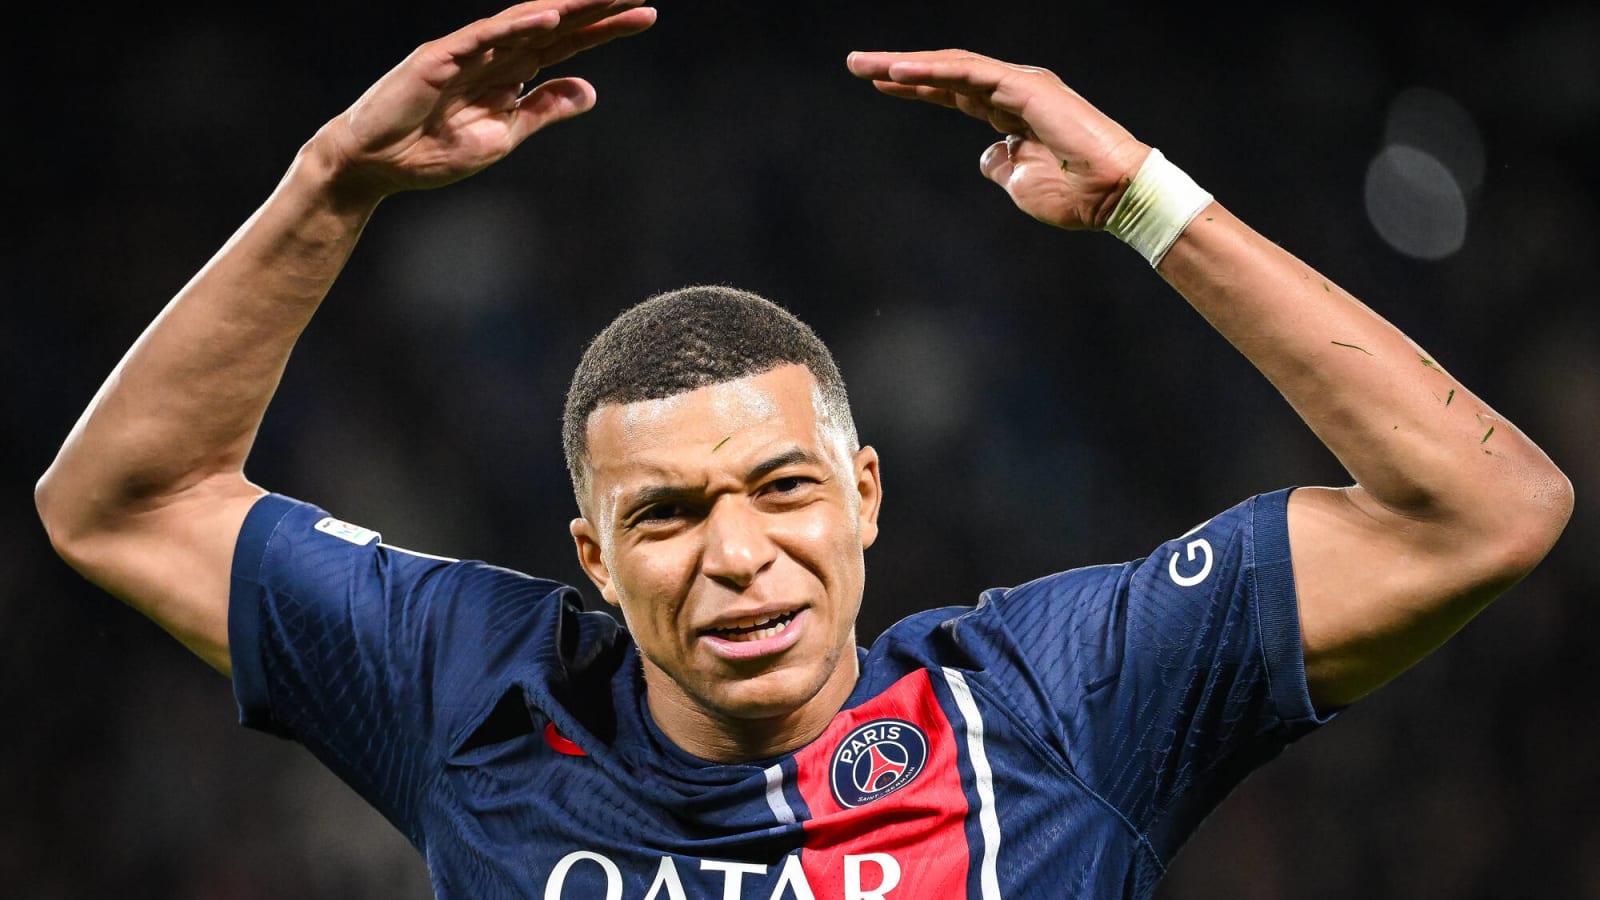 Newcastle should be concerned by Mbappe’s recent declaration